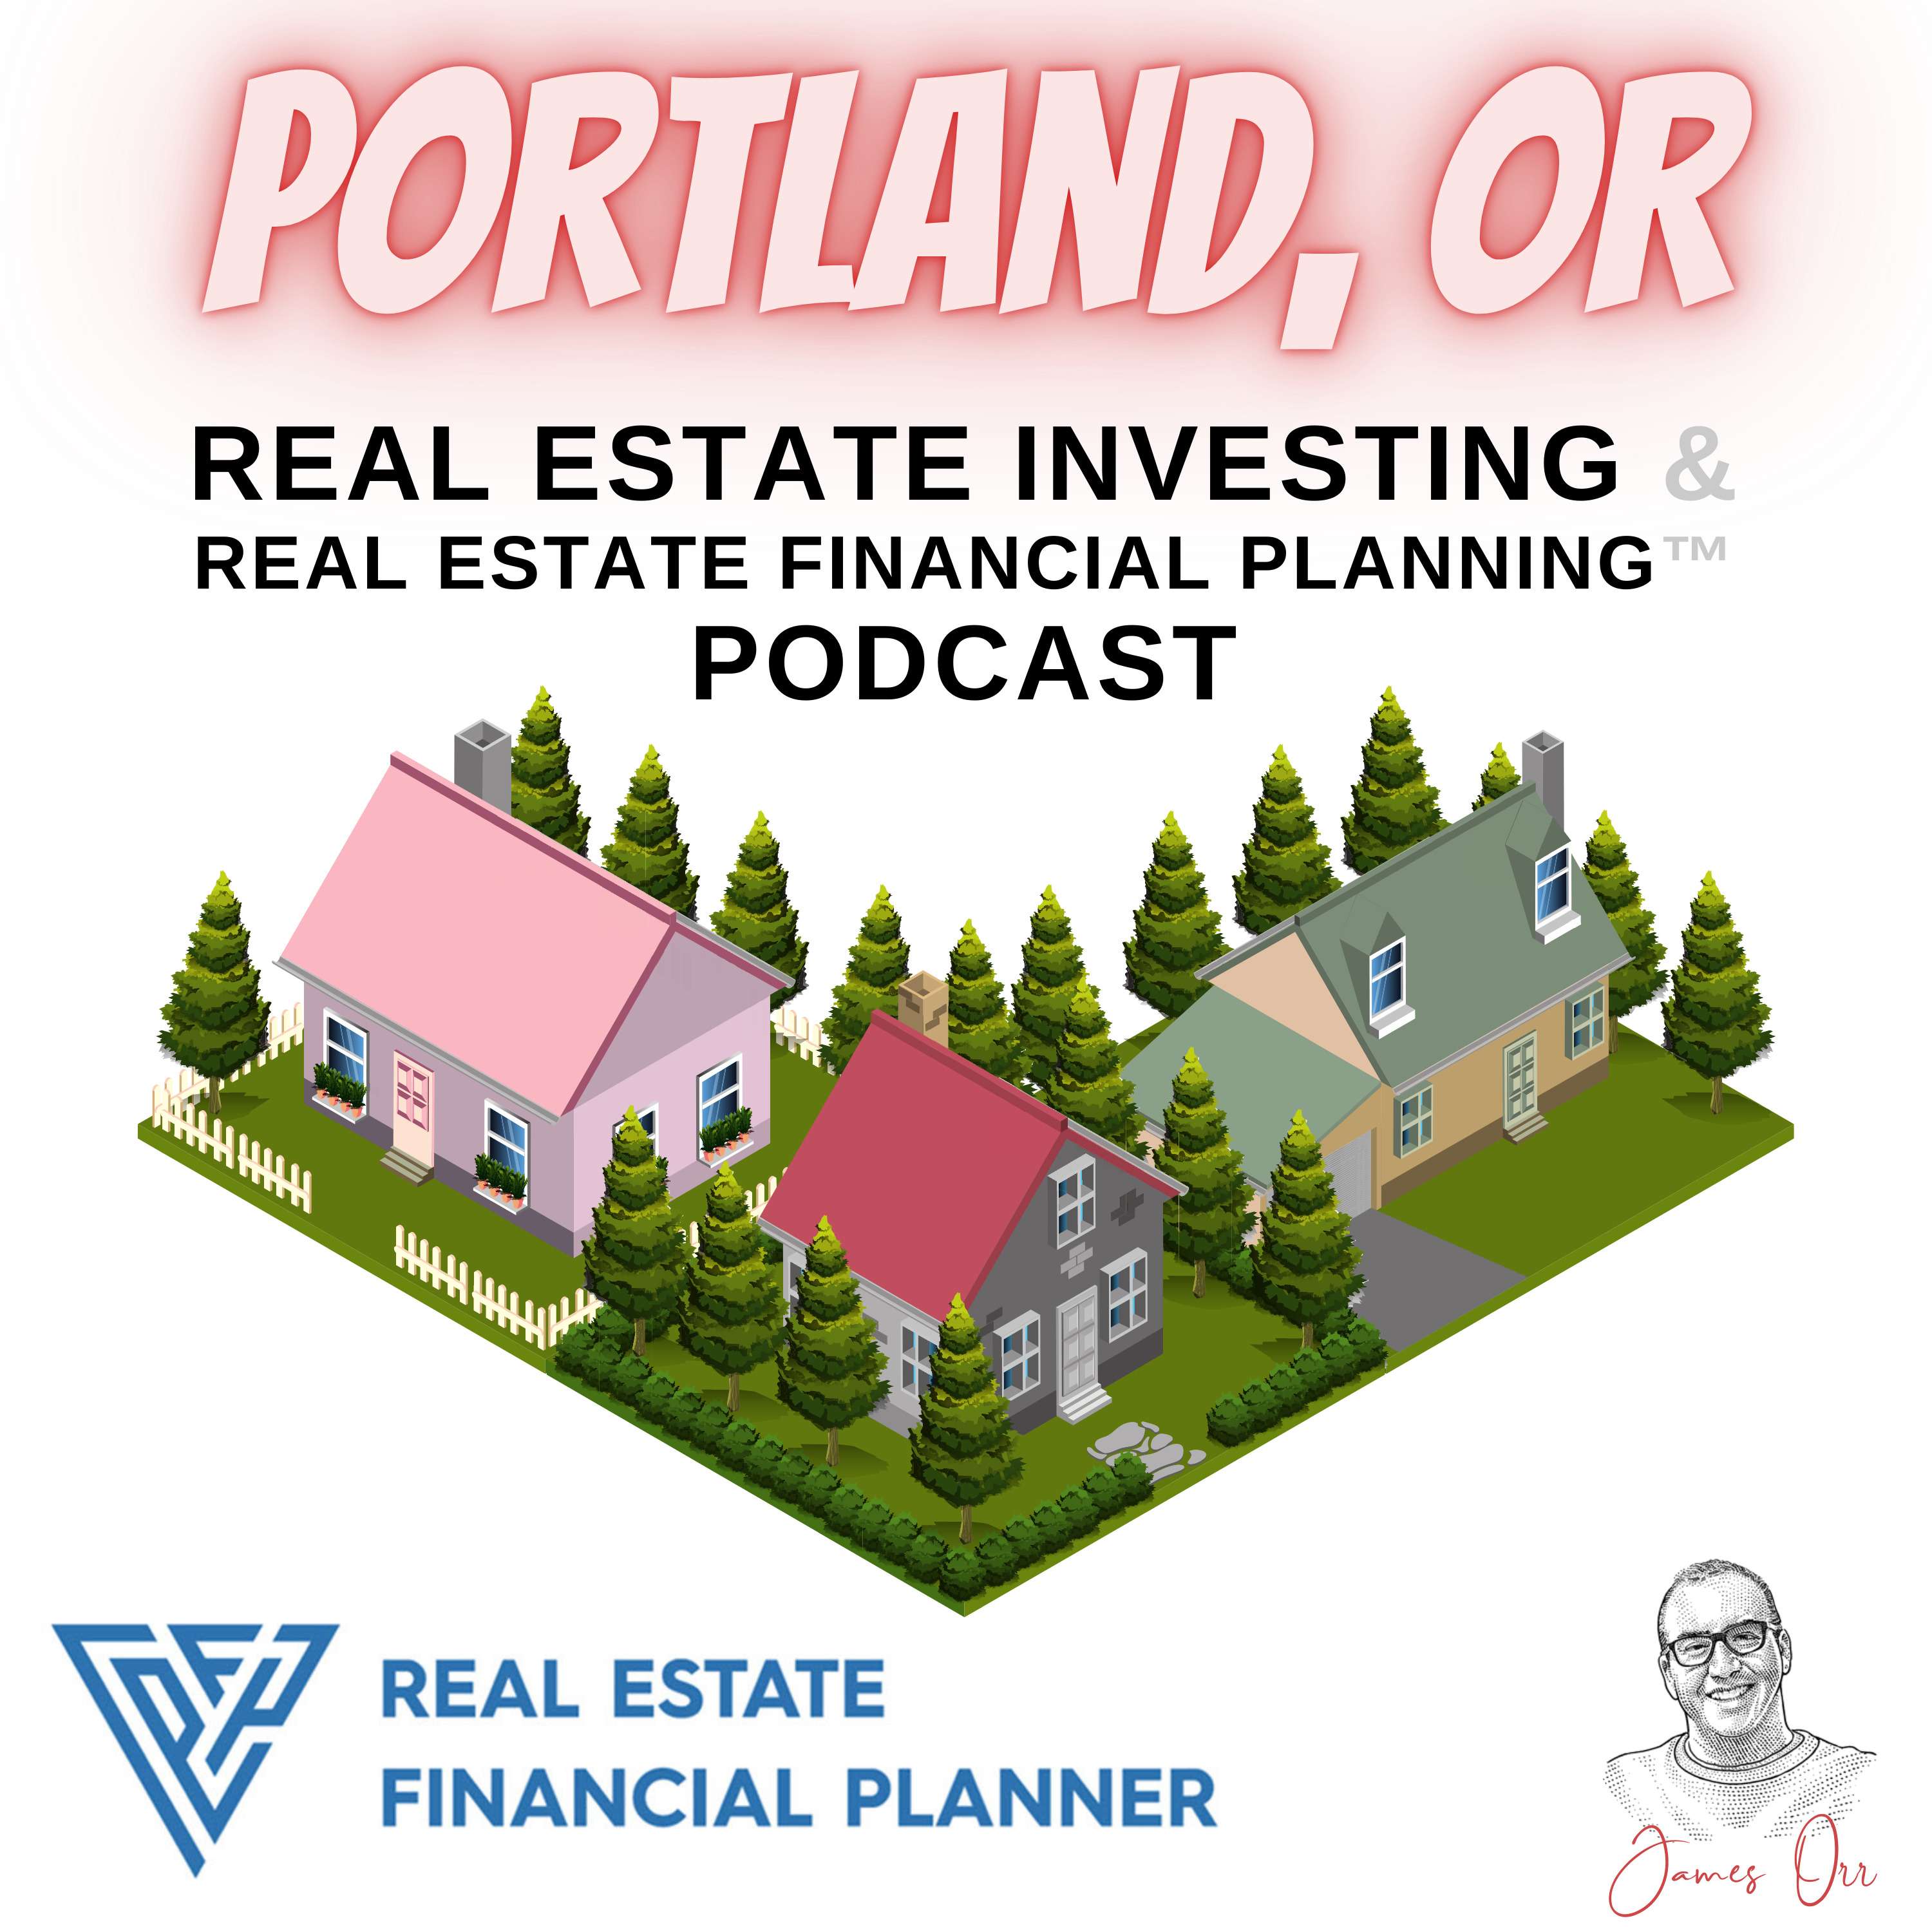 Portland, OR Real Estate Investing & Real Estate Financial Planning Podcast